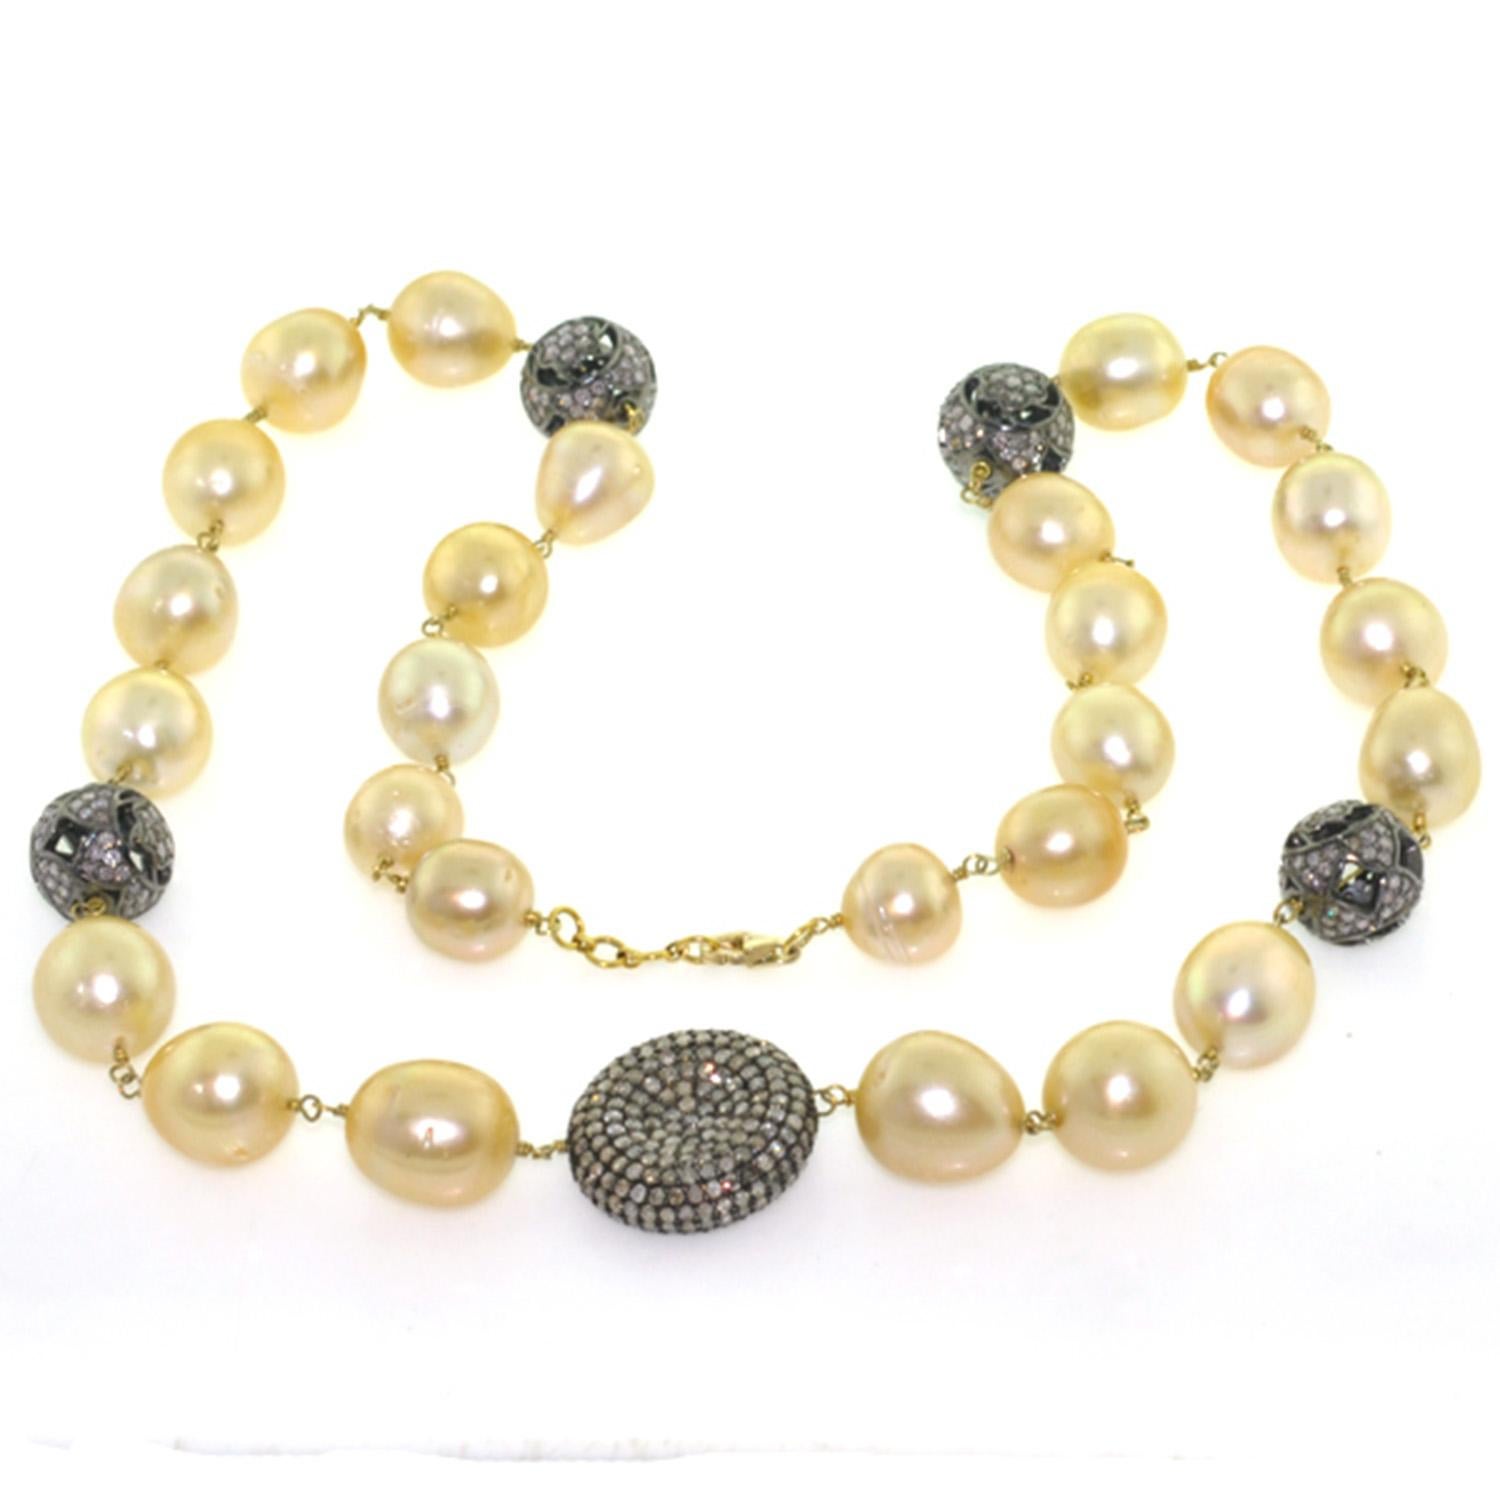 Round Cut Beaded Matinee Necklace With South Sea Pearls & Pave Diamonds Stations For Sale